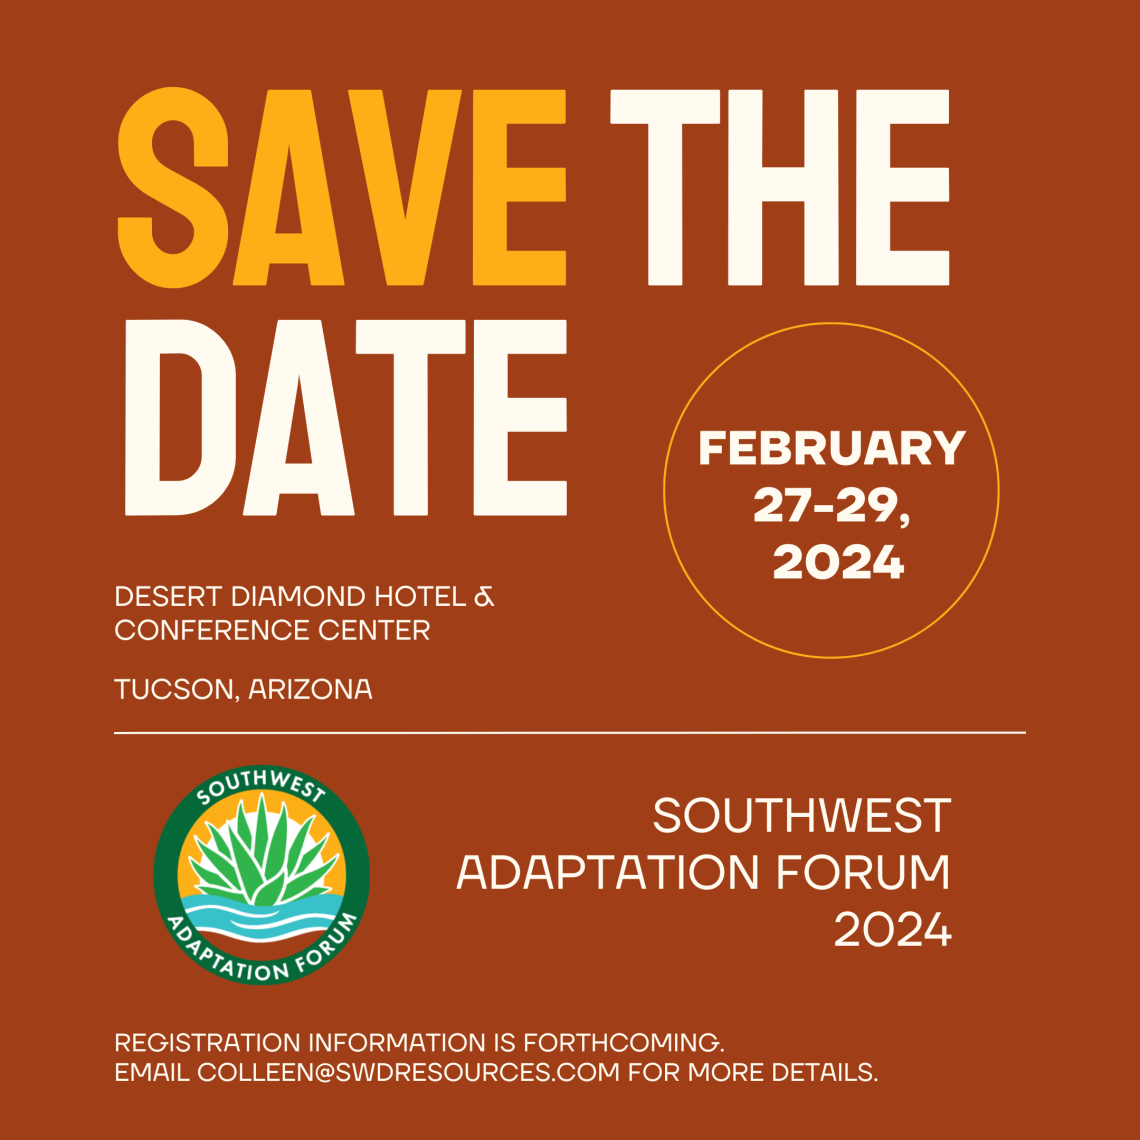 Southwest Adaptation Forum 2024 - Save the date for February 27-29 2024. Desert Diamond Hotel & Conference Center. Email colleen@swdresources.com for more details.